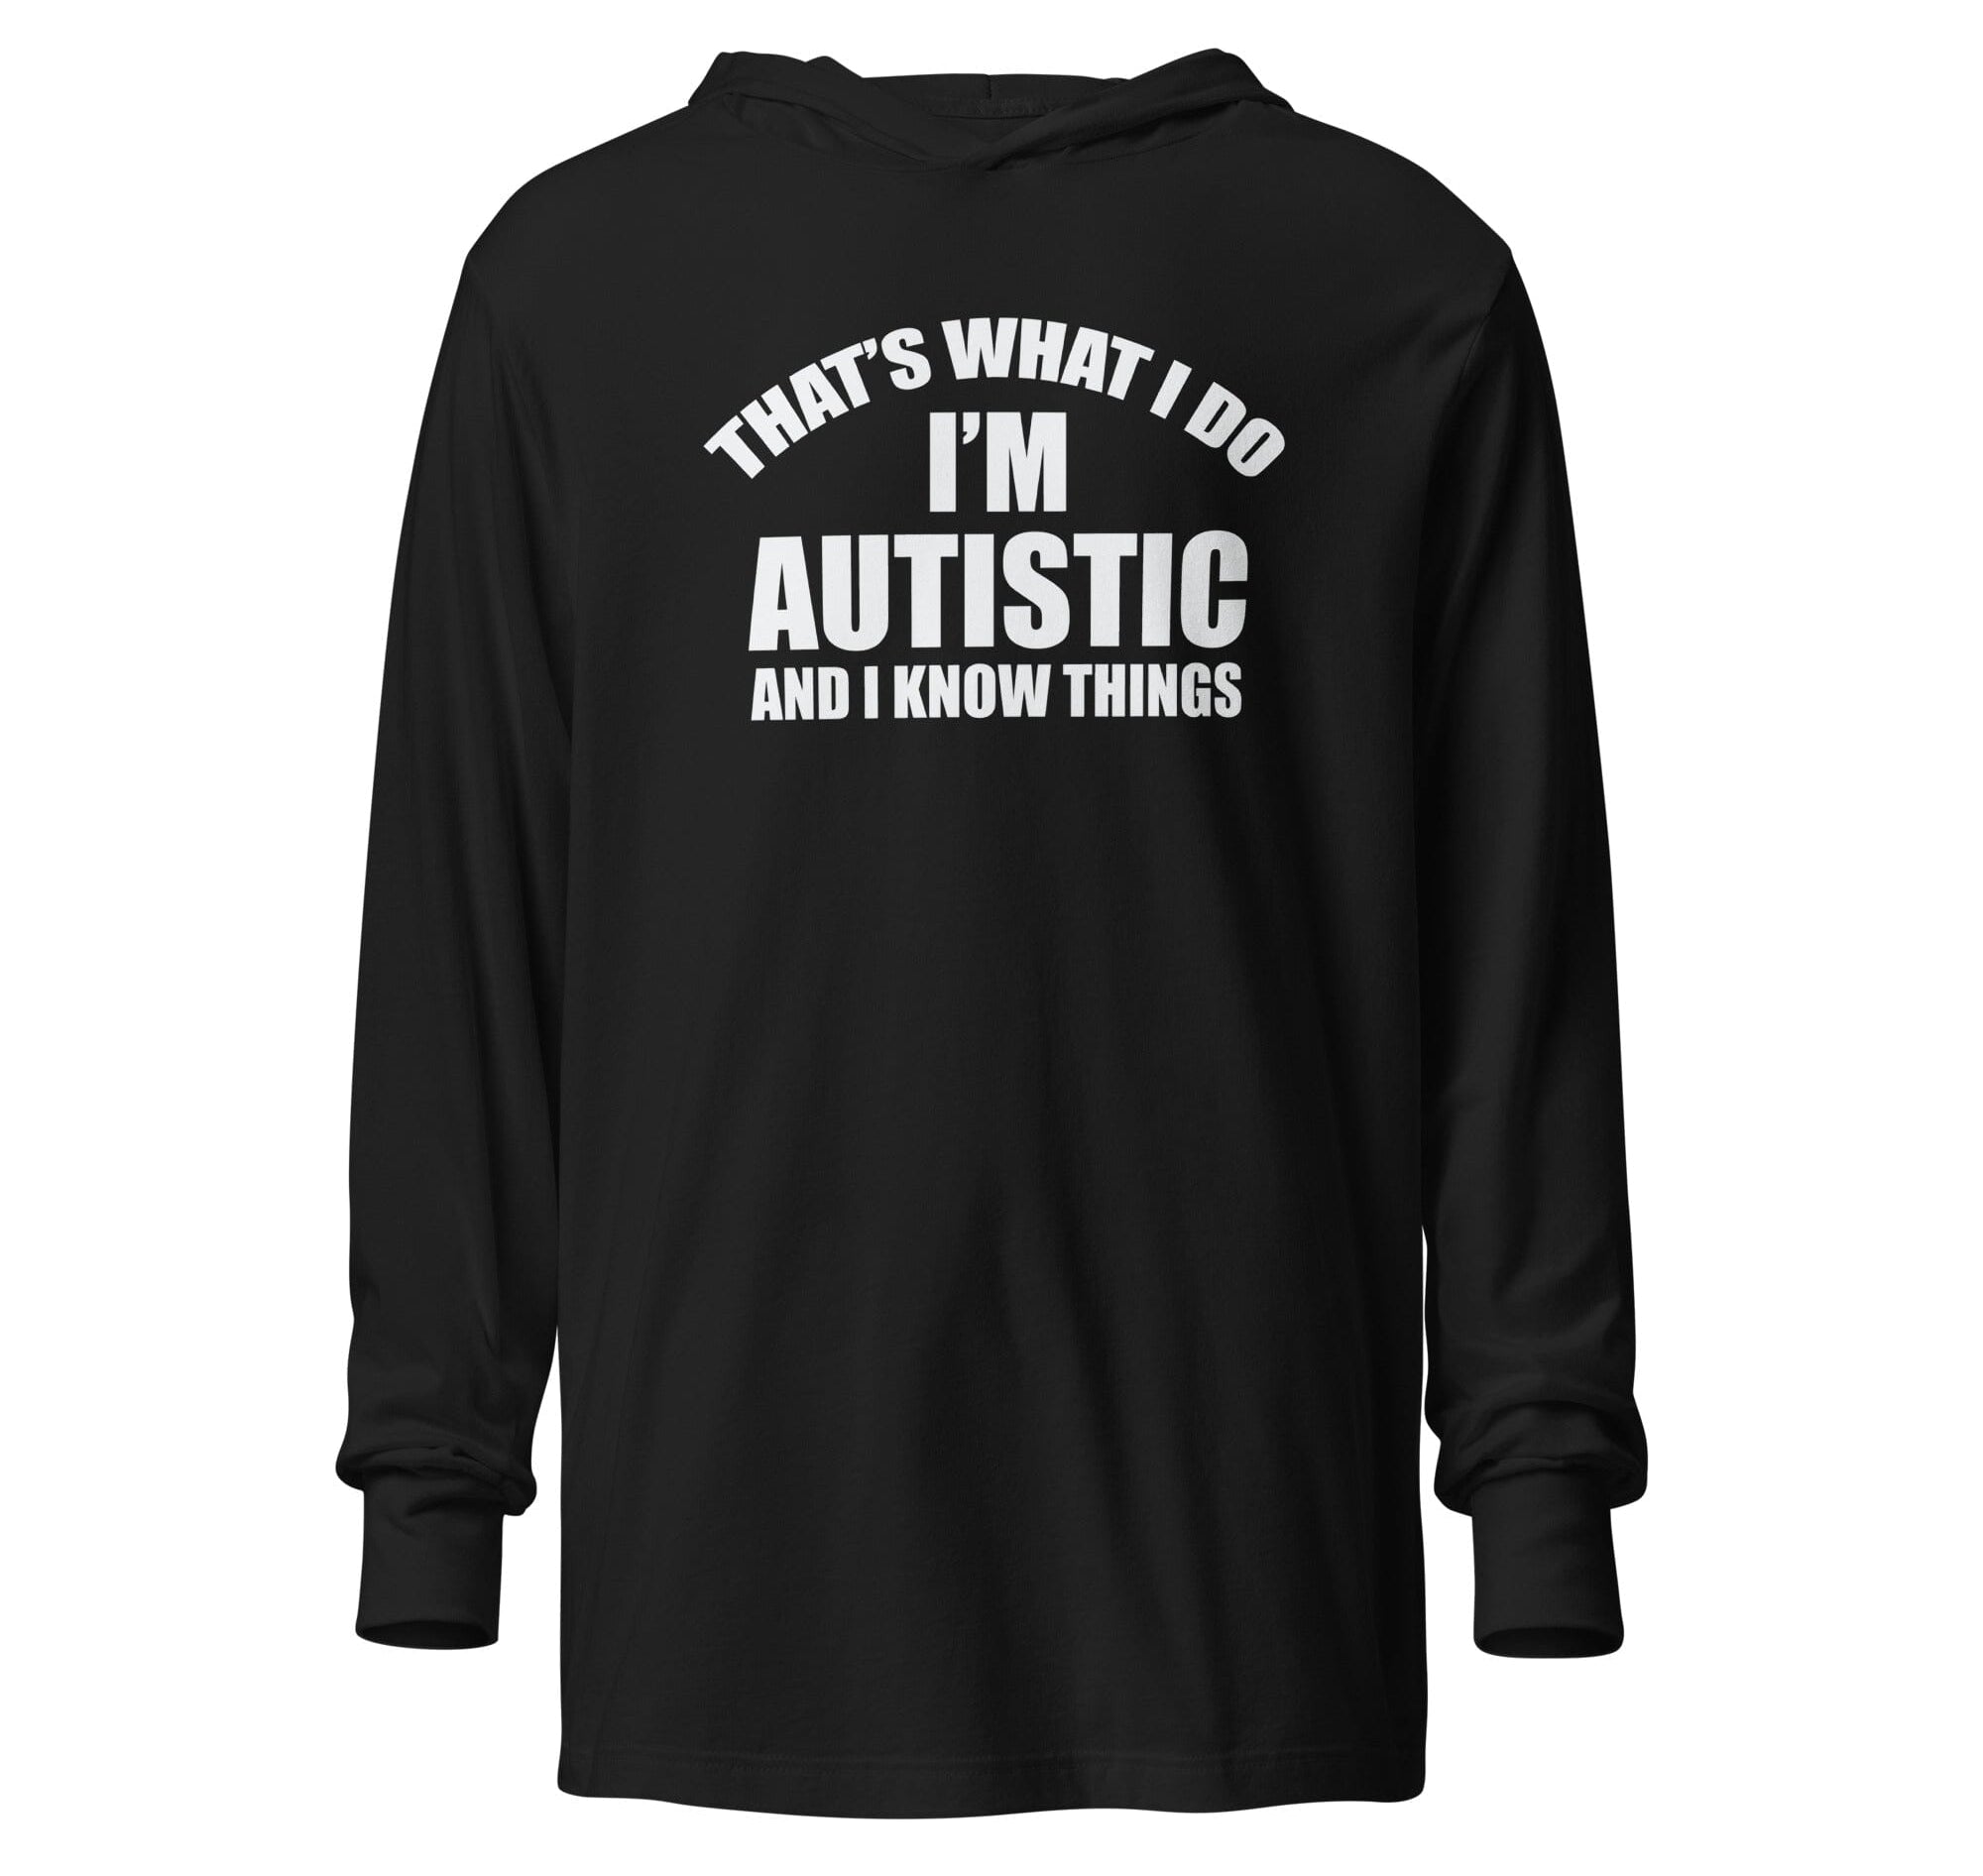 That's What I Do, I'm Autistic and I Know Things Unisex Hooded long-sleeve tee The Autistic Innovator Black XS 